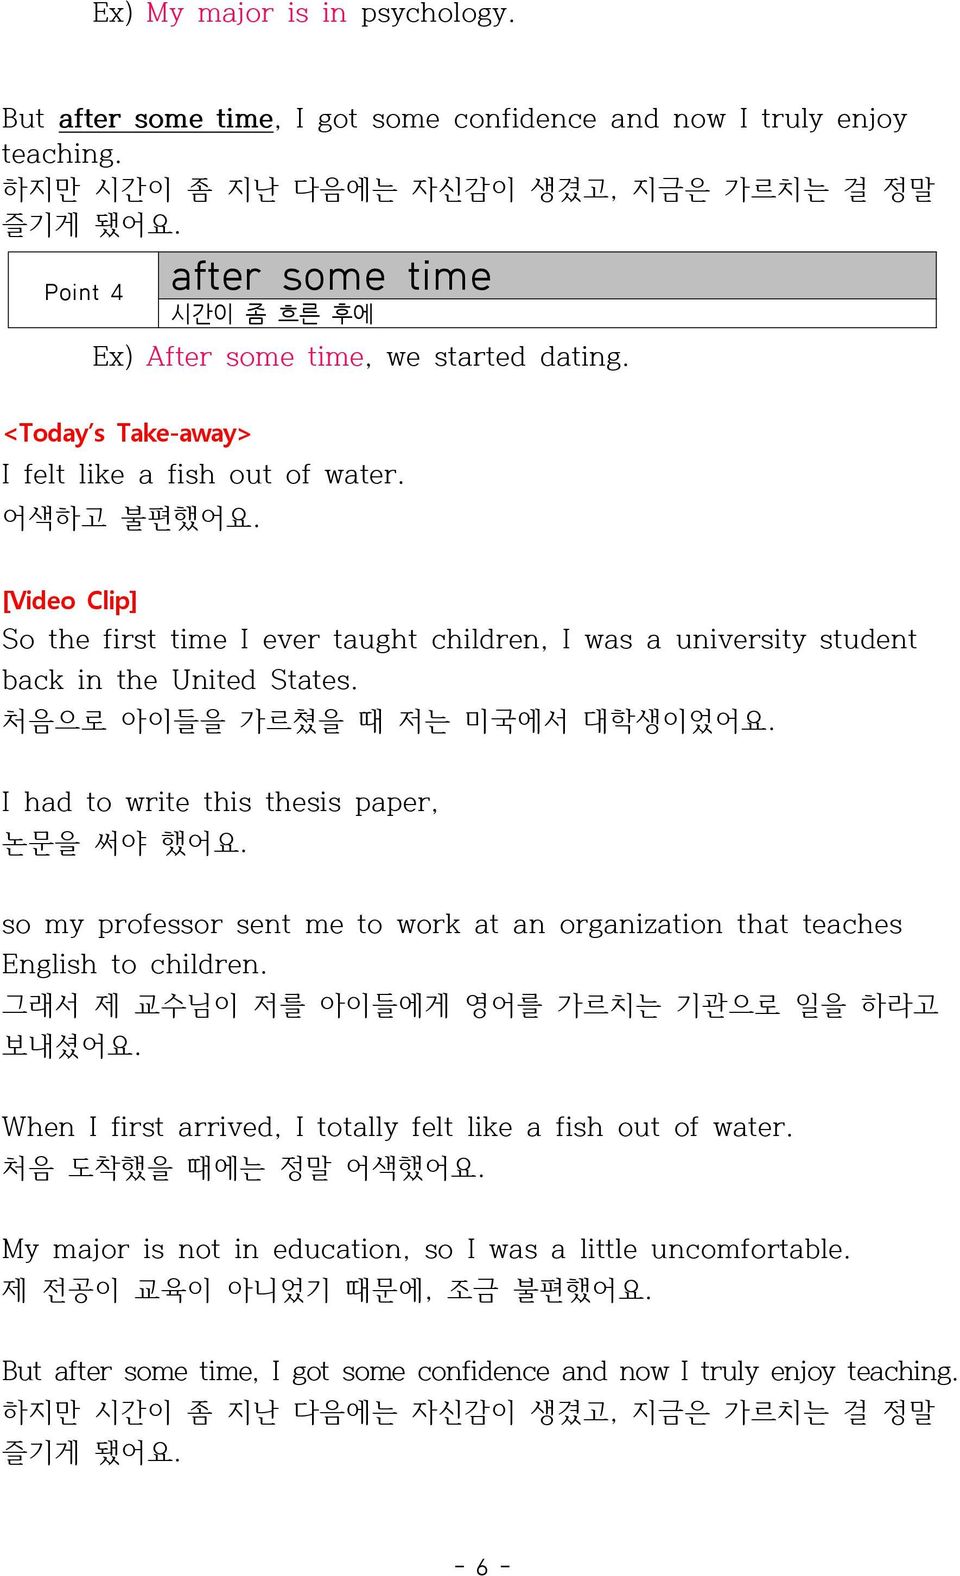 So the first time I ever taught children, I was a university student back in the United States. 처음으로 아이들을 가르쳤을 때 저는 미국에서 대학생이었어요. I had to write this thesis paper, 논문을 써야 했어요.